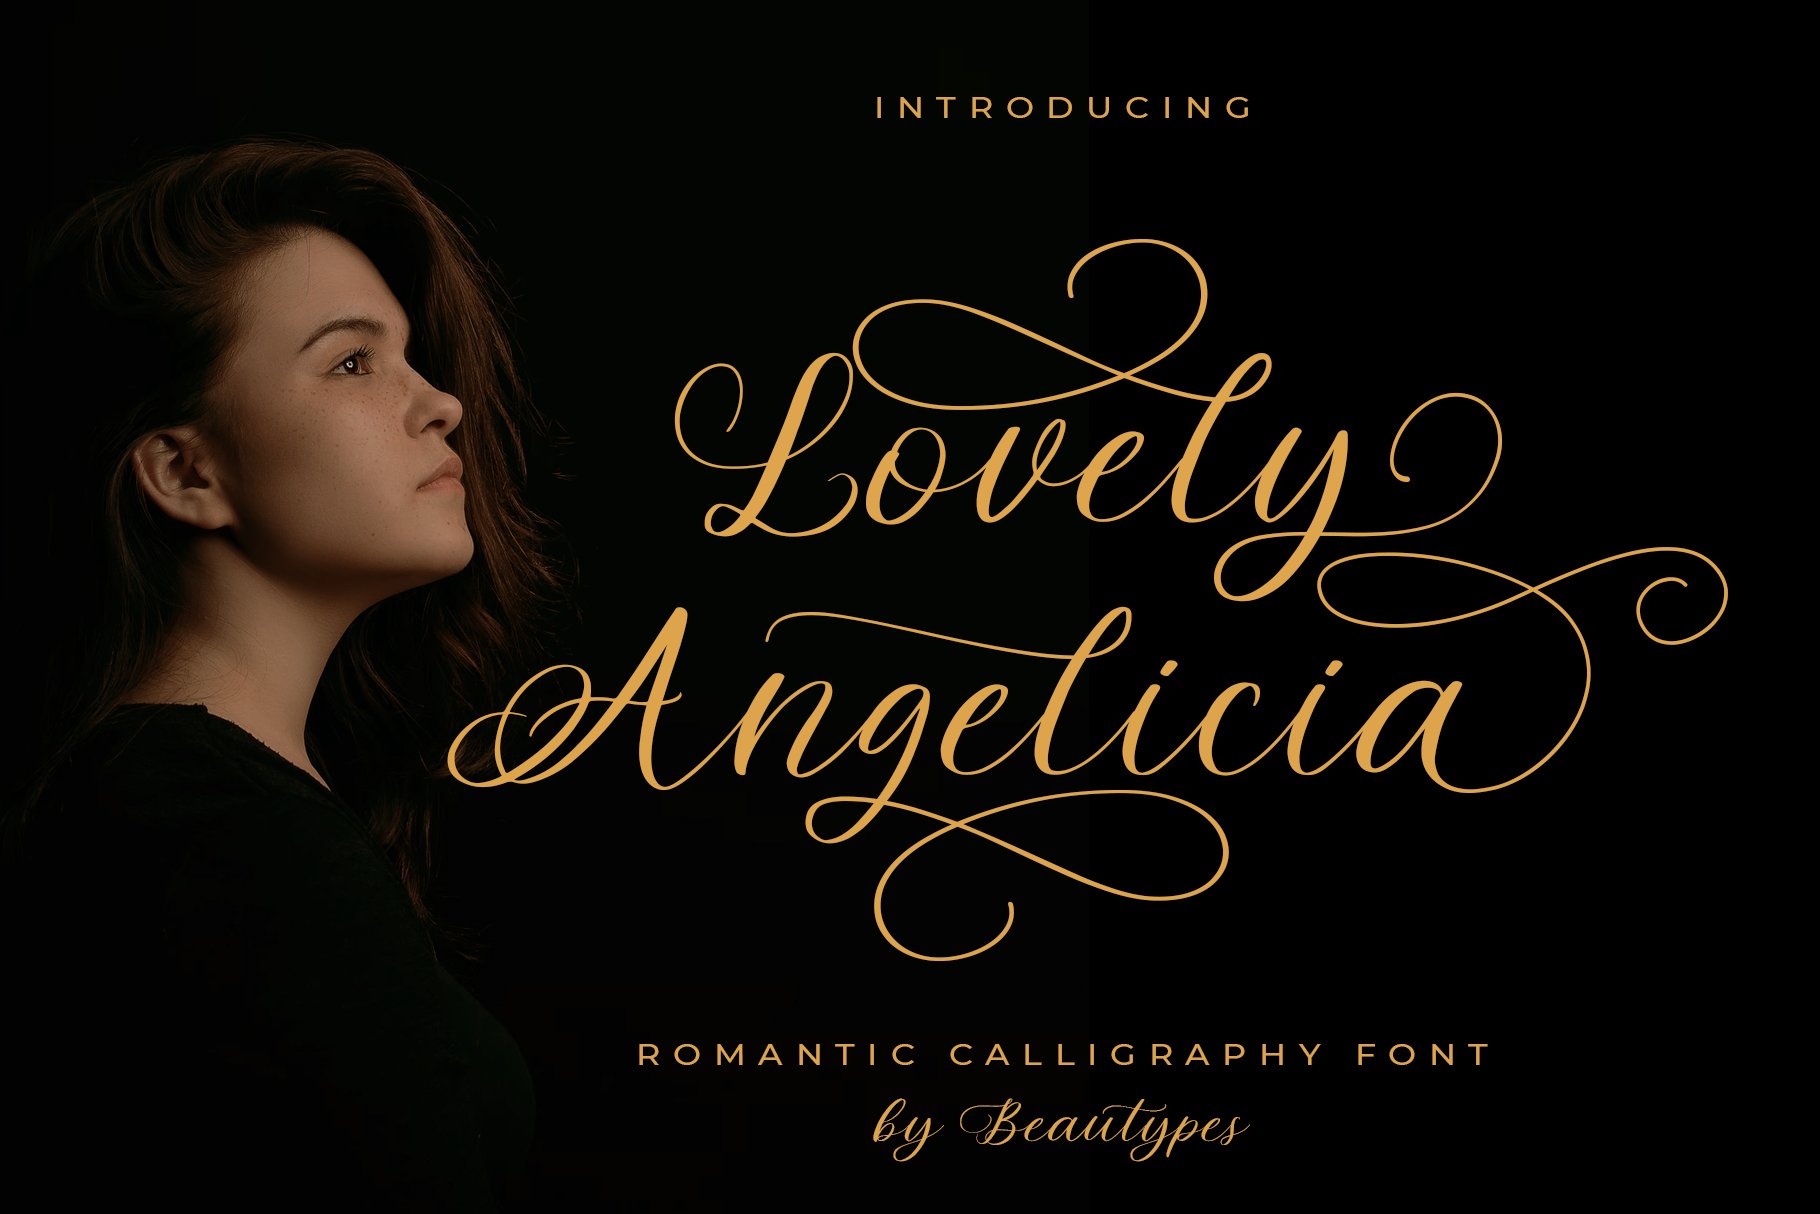 Lovely Angelicia - Romantic Font cover image.